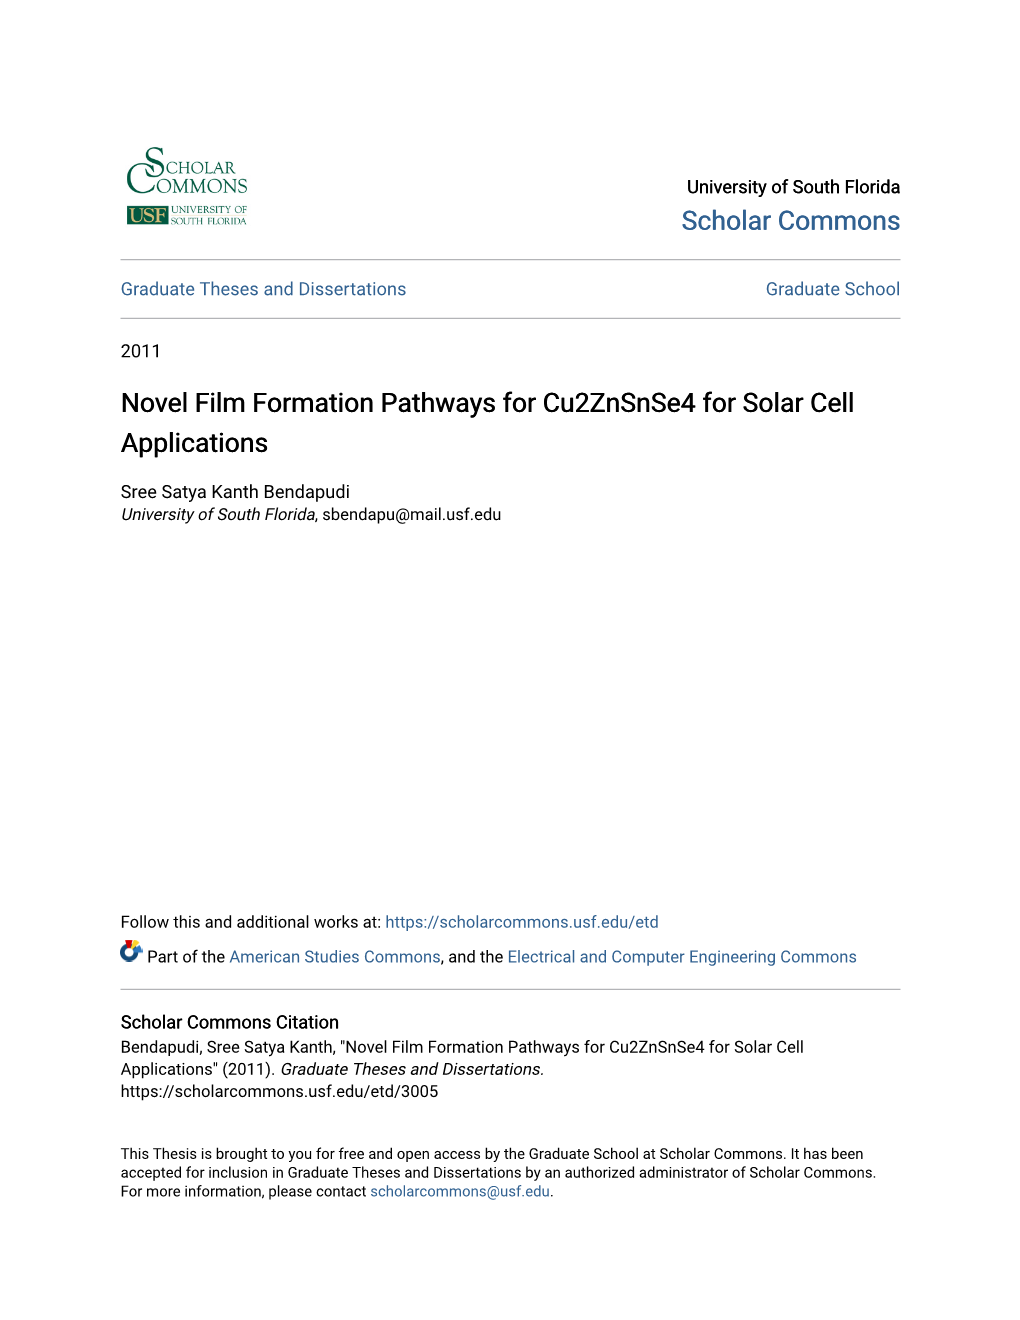 Novel Film Formation Pathways for Cu2znsnse4 for Solar Cell Applications